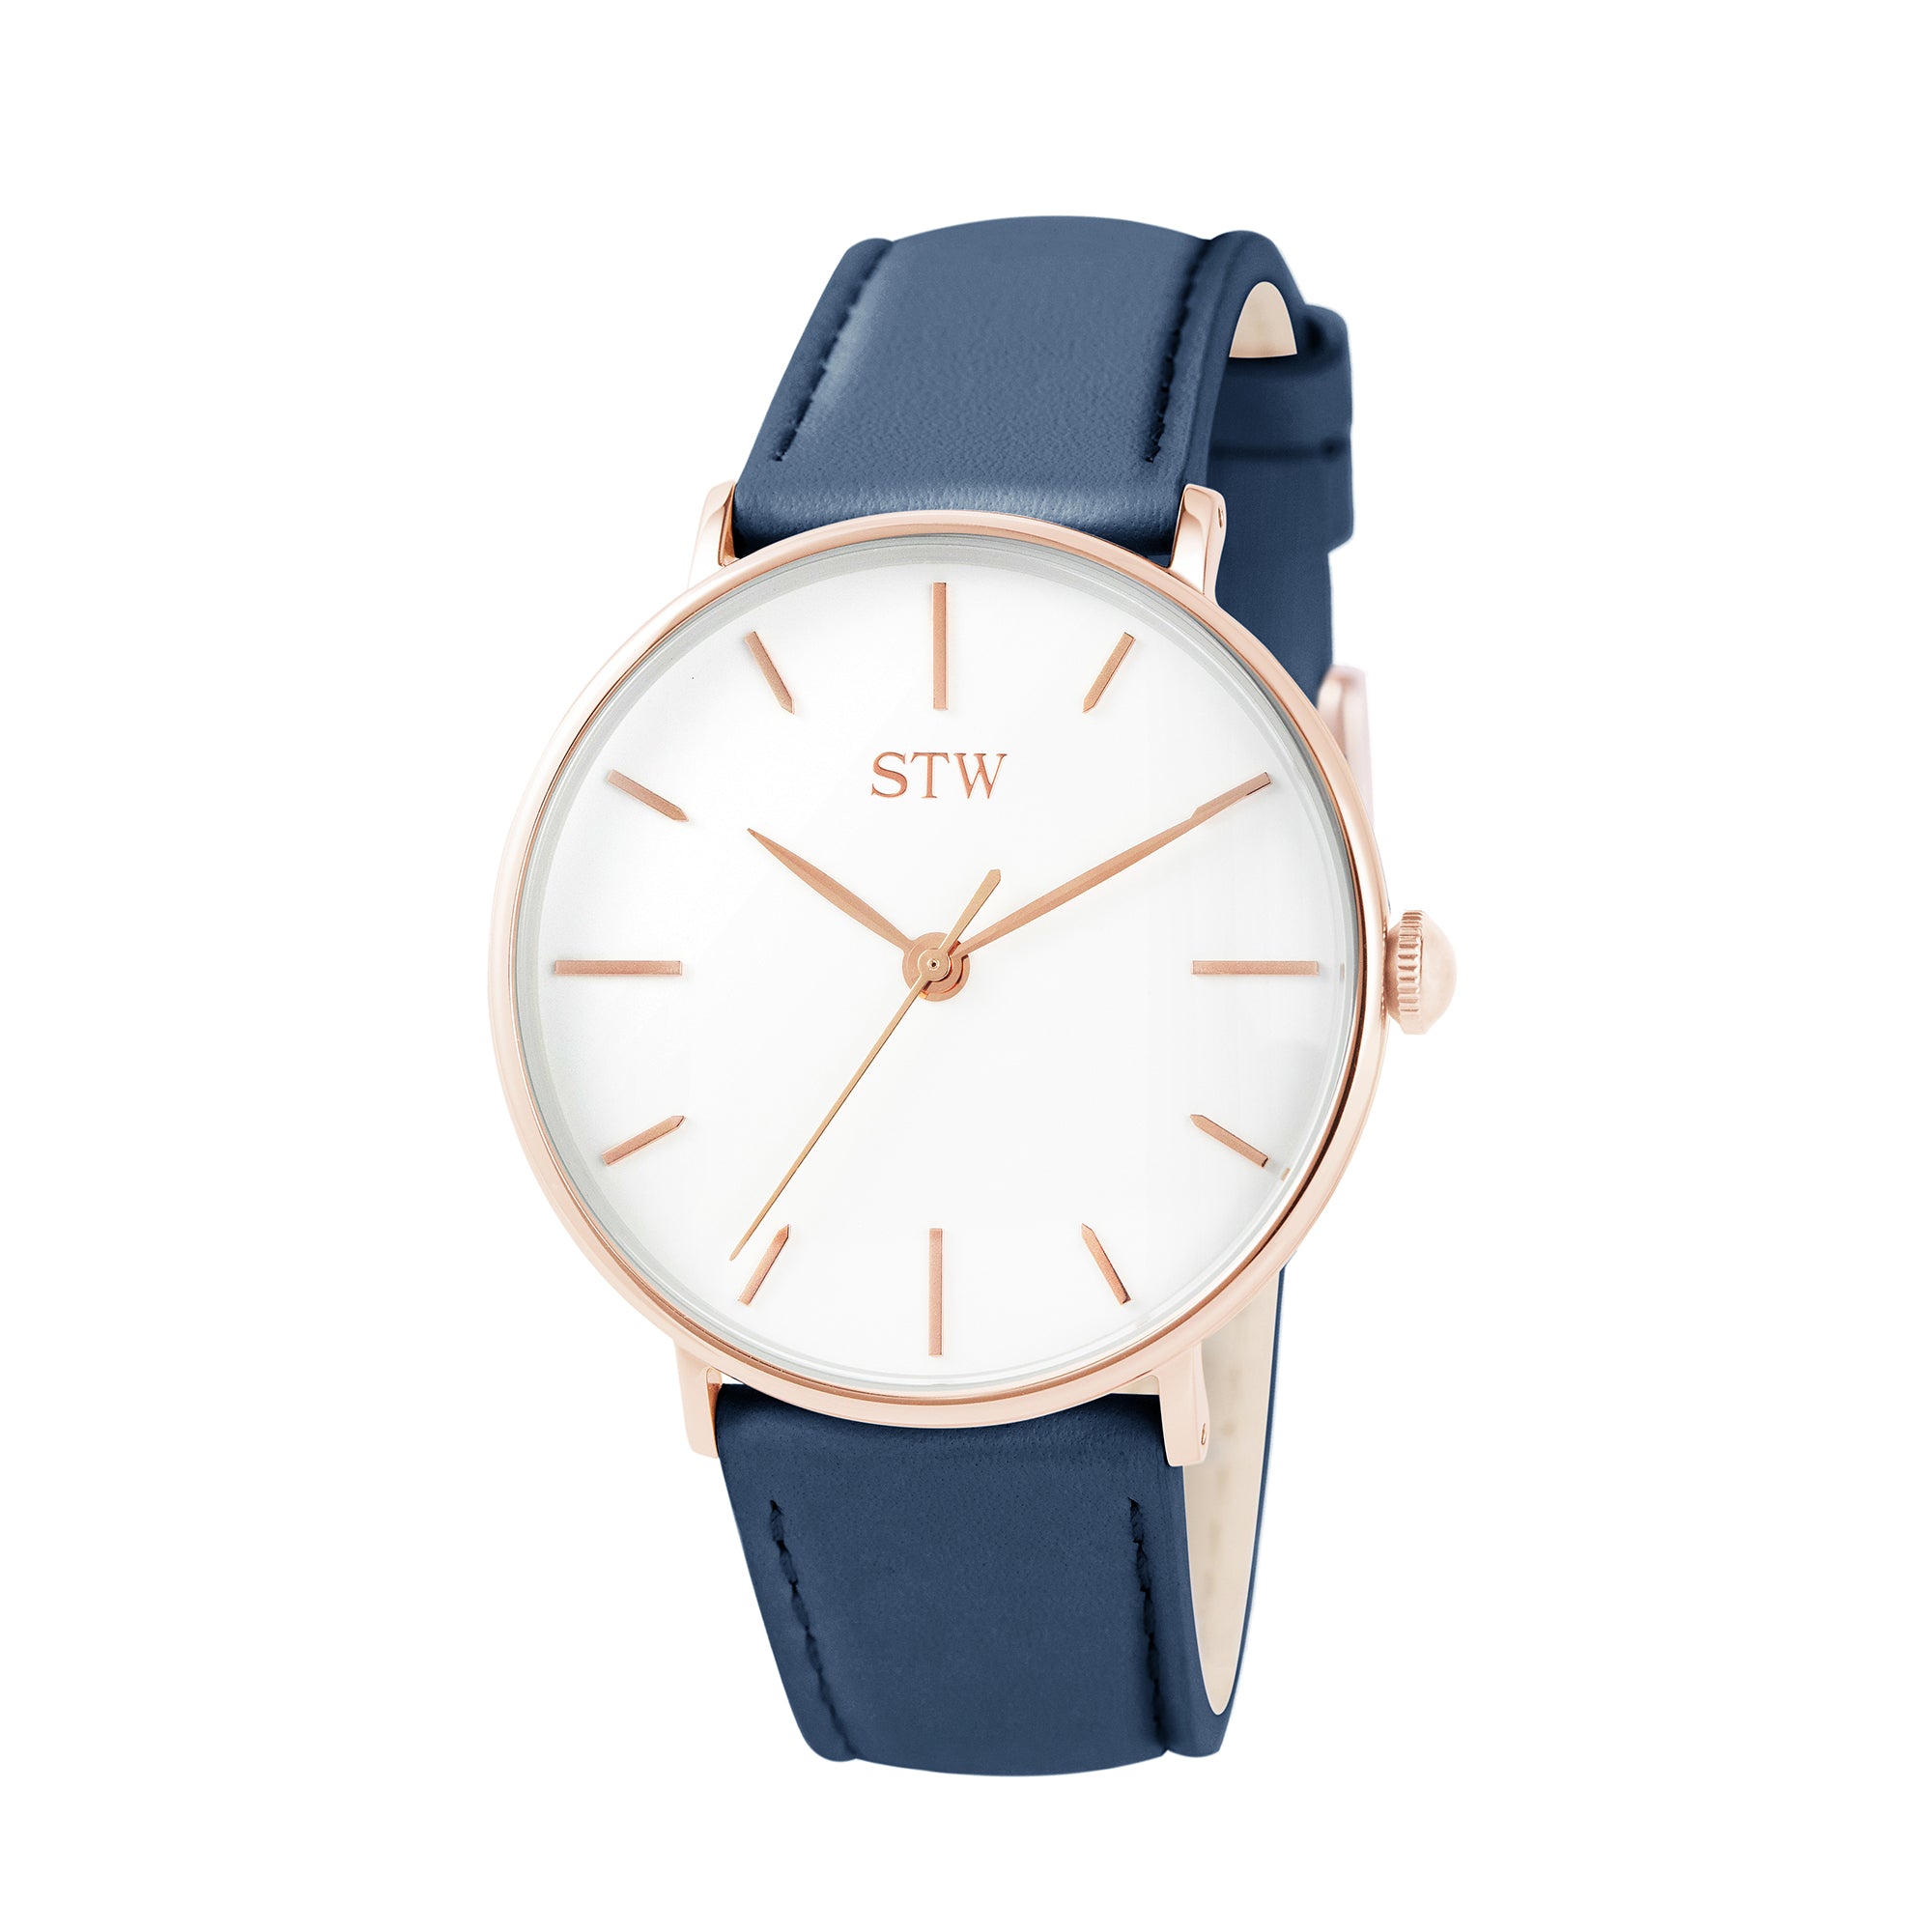 THE HERITAGE -  WHITE DIAL / BLUE LEATHER STRAP WATCH